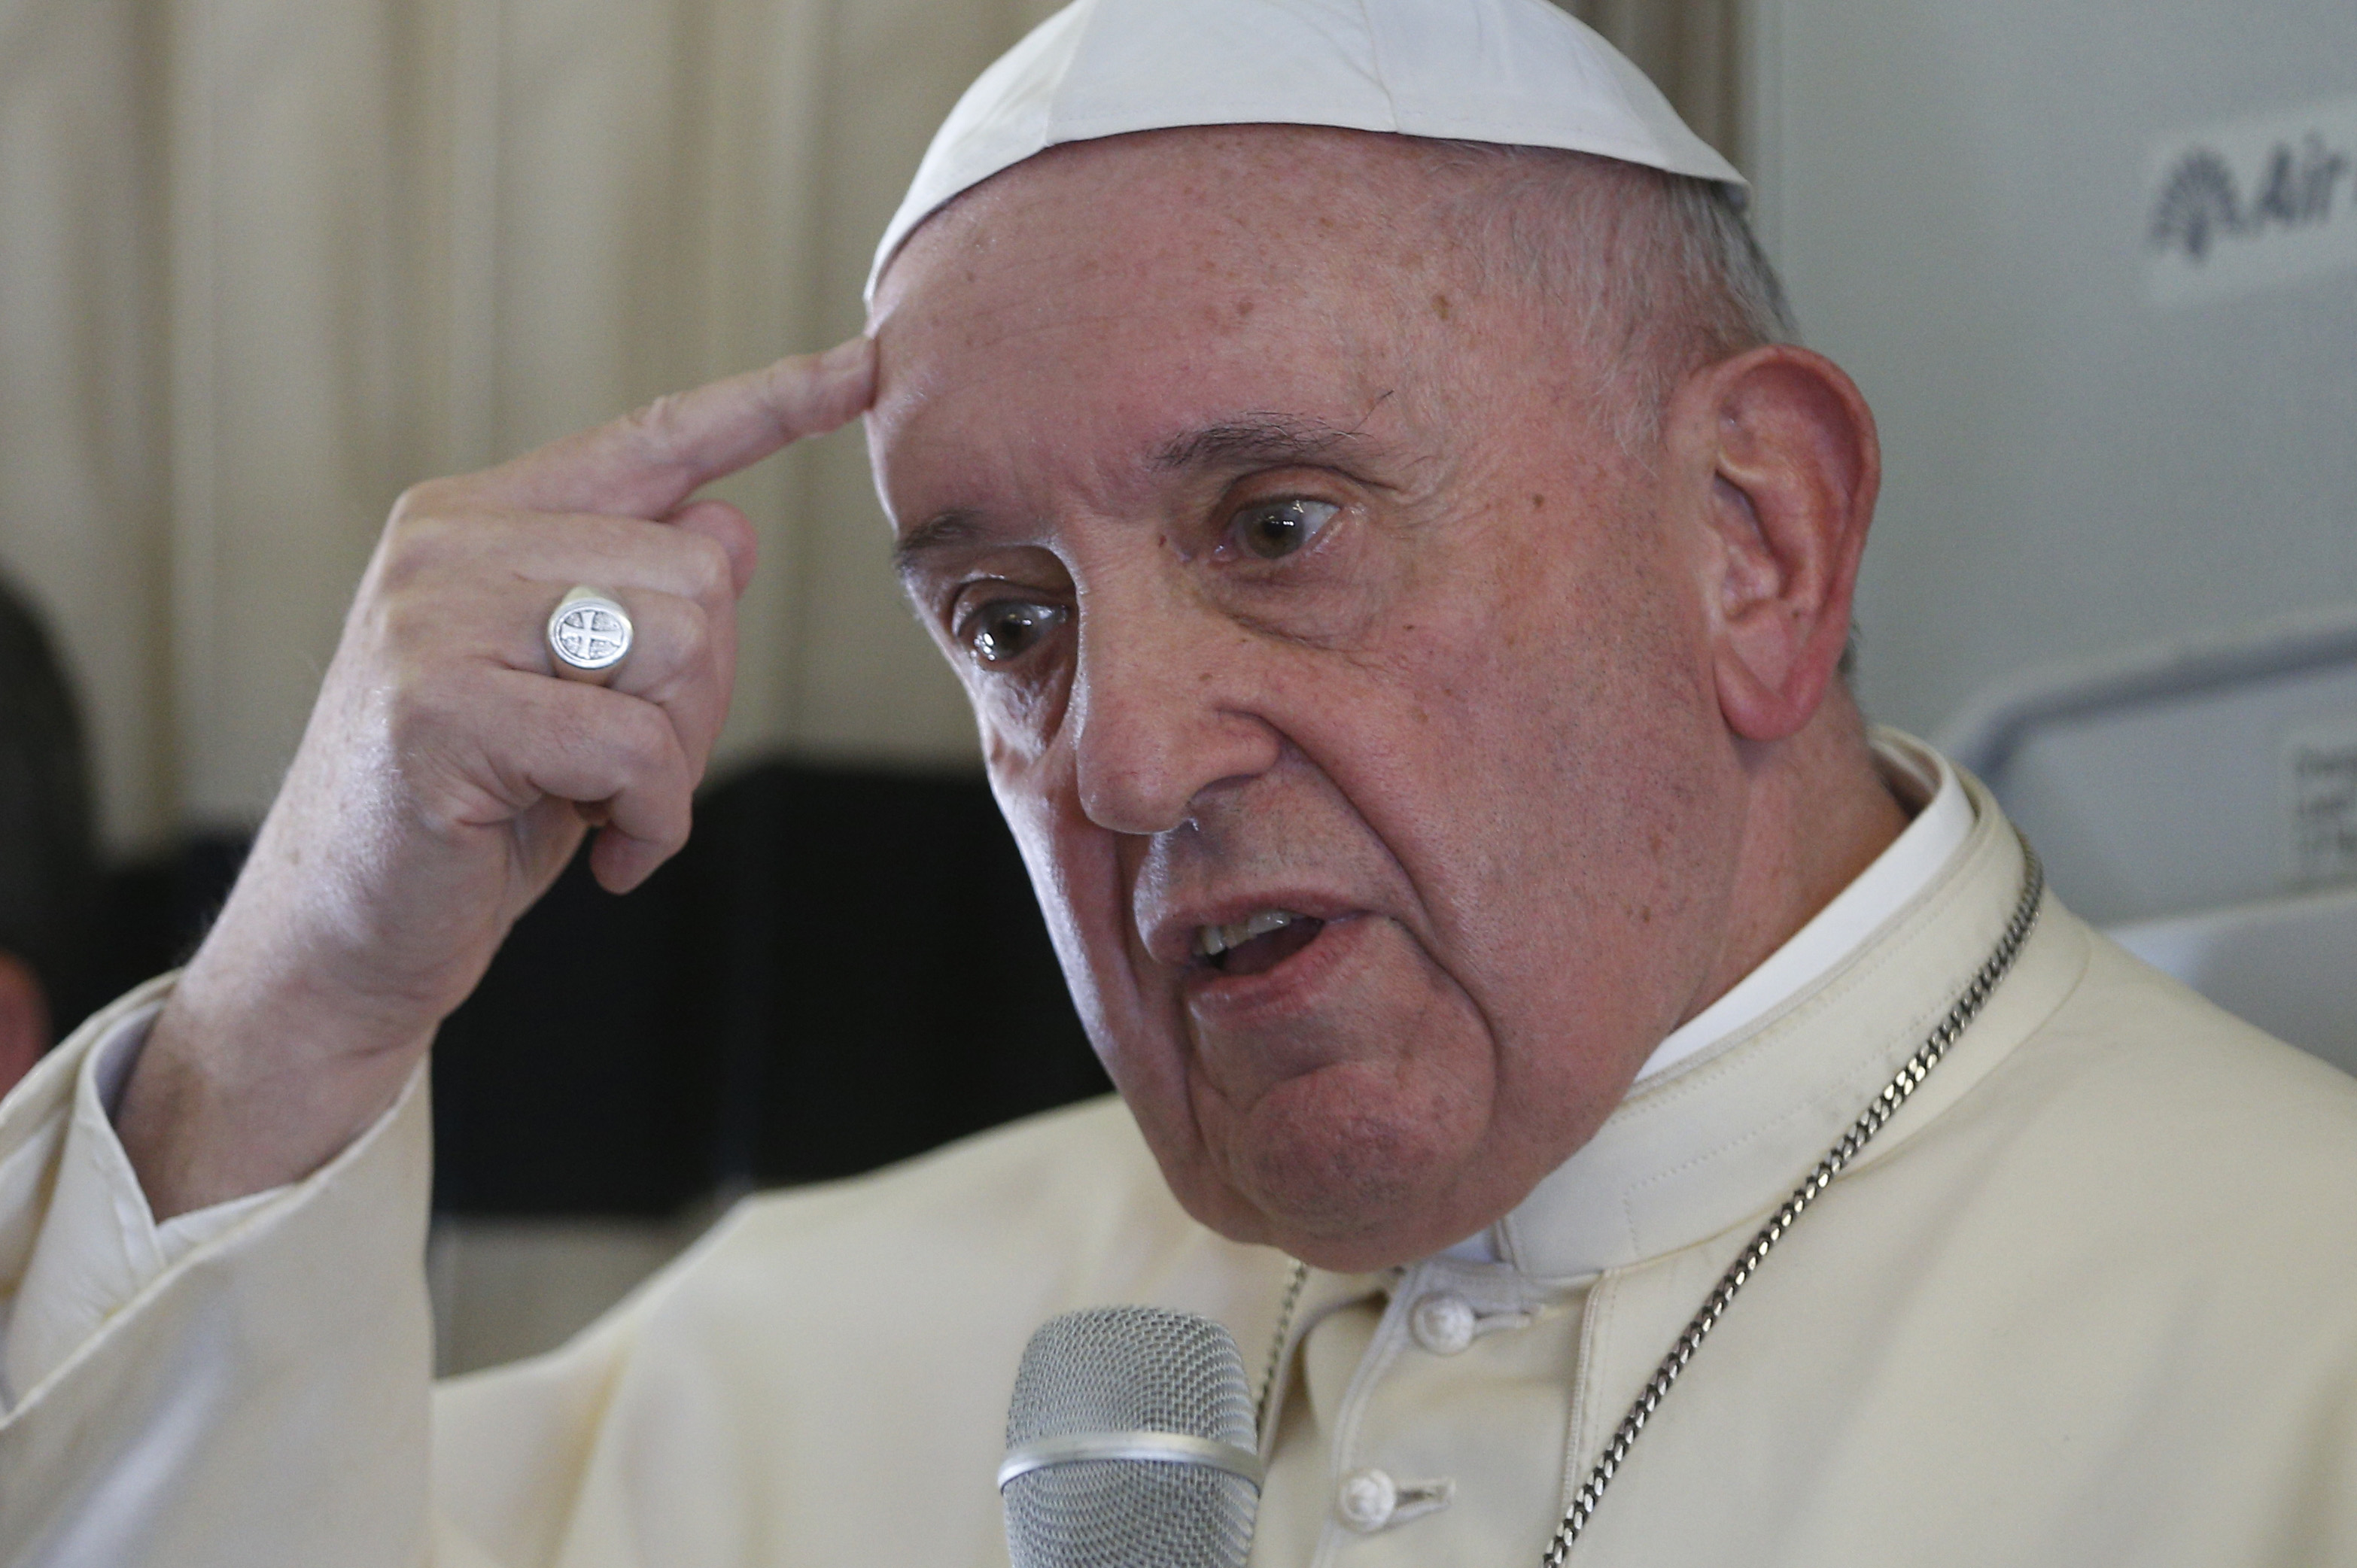 Analysis: Pope tells opponents learn how to disagree or risk schism